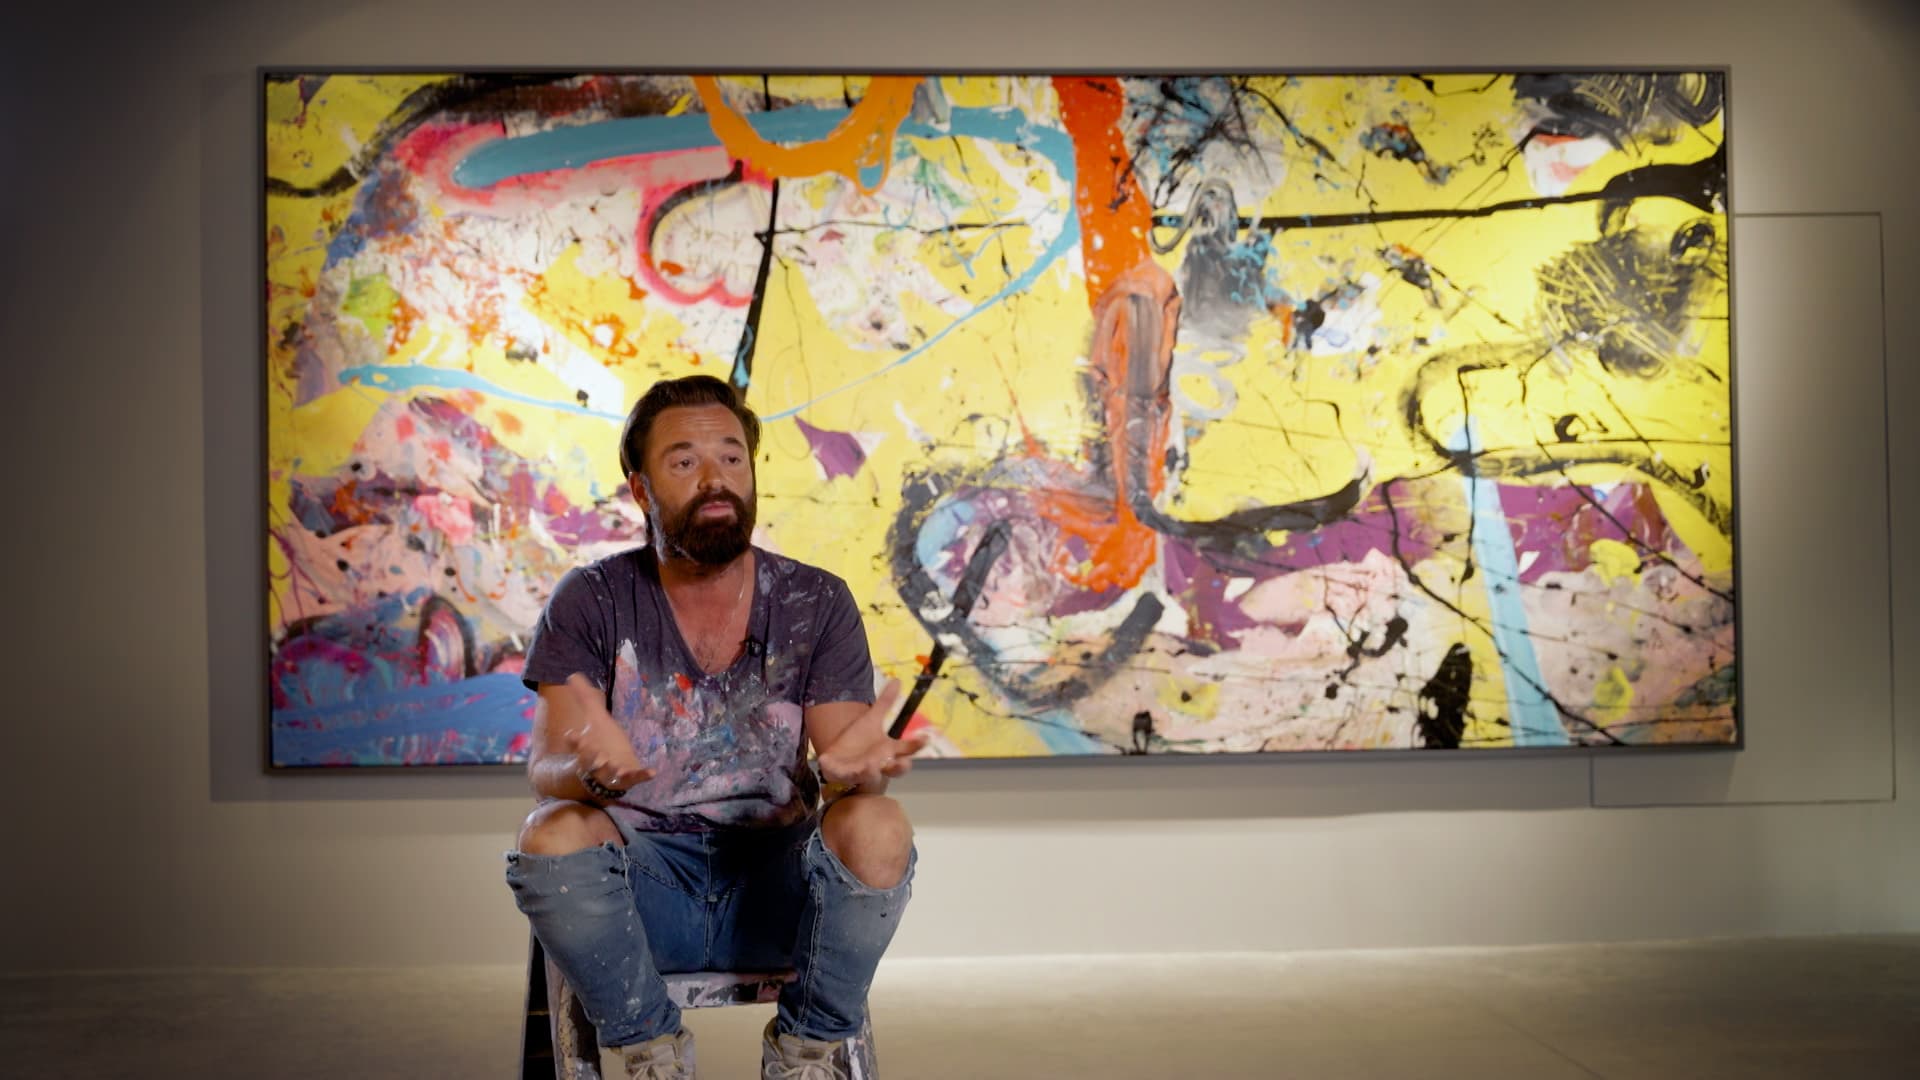 Meet the Dubai artist whose work has sold for millions — and turns down 99% of prospective buyers